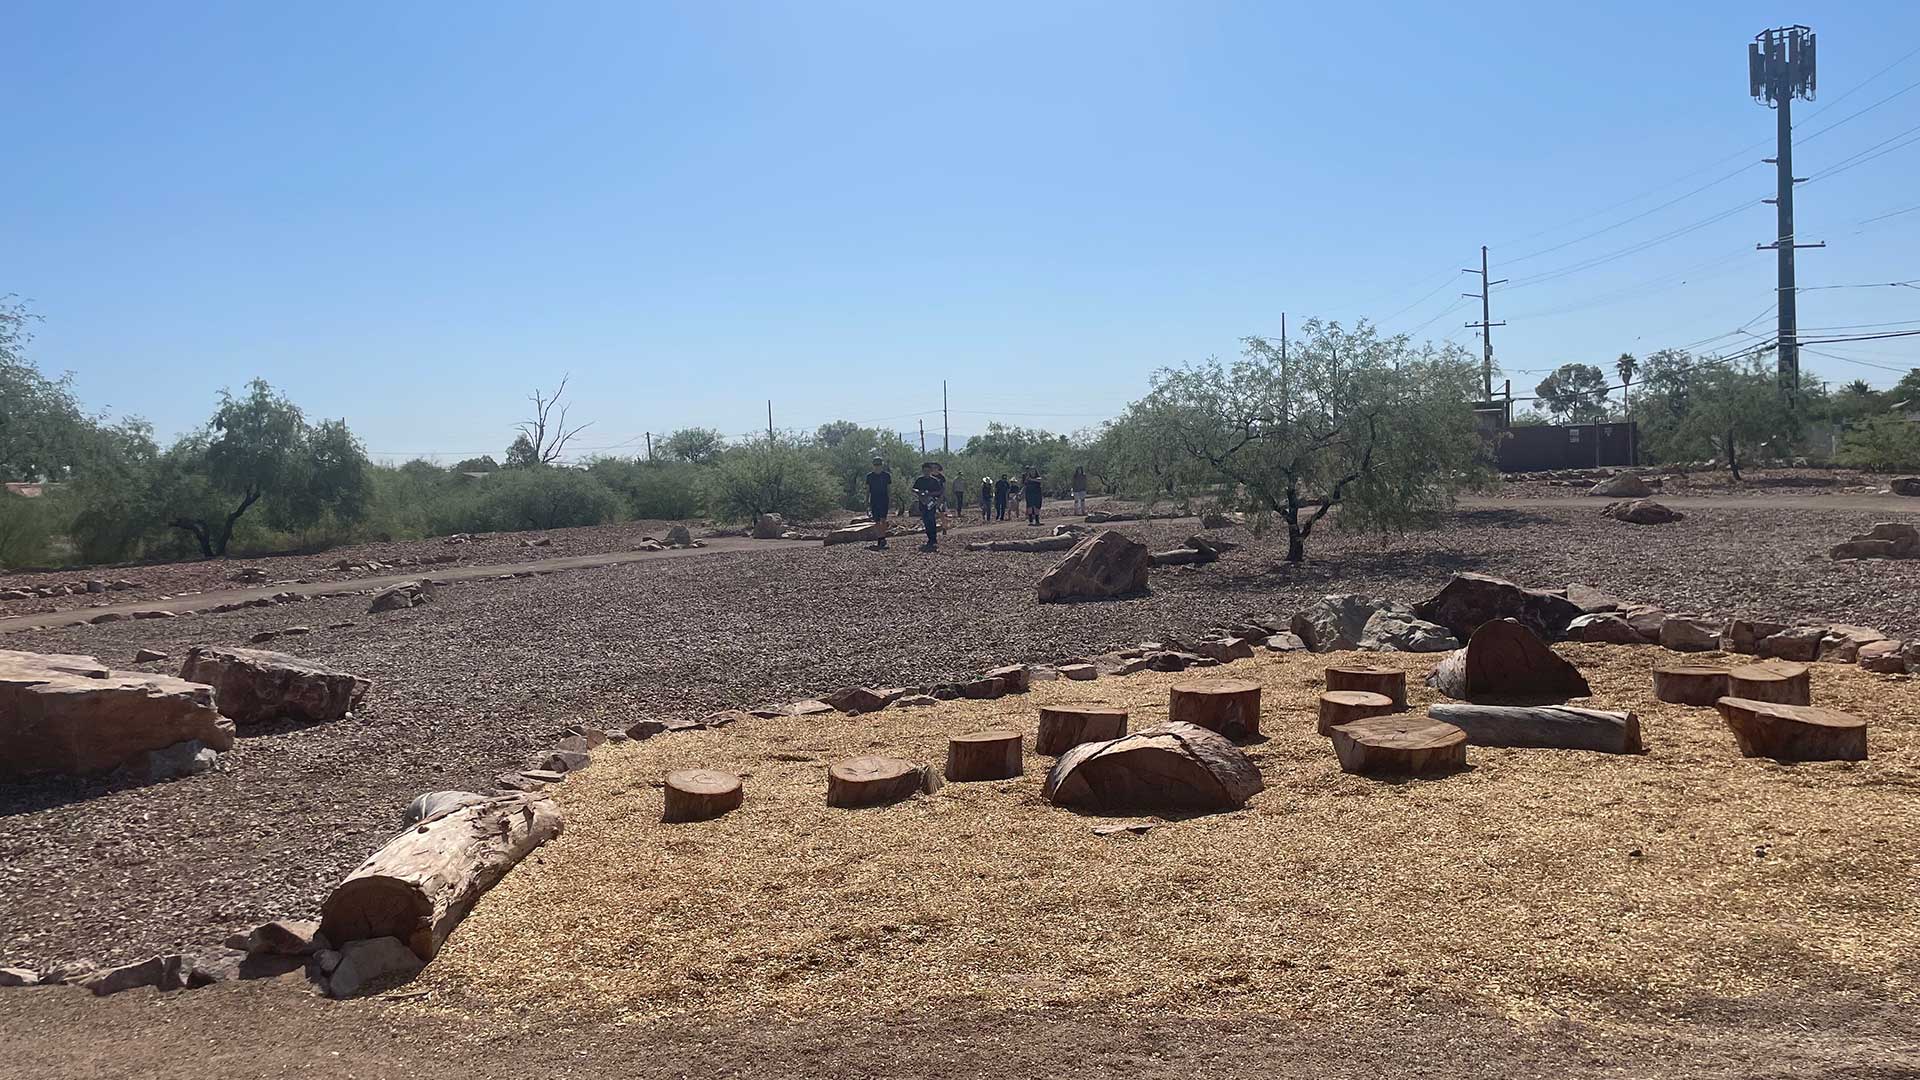 La Mar Park in Tucson's Rose Neighborhood has been transformed from a dump site to a working rain garden